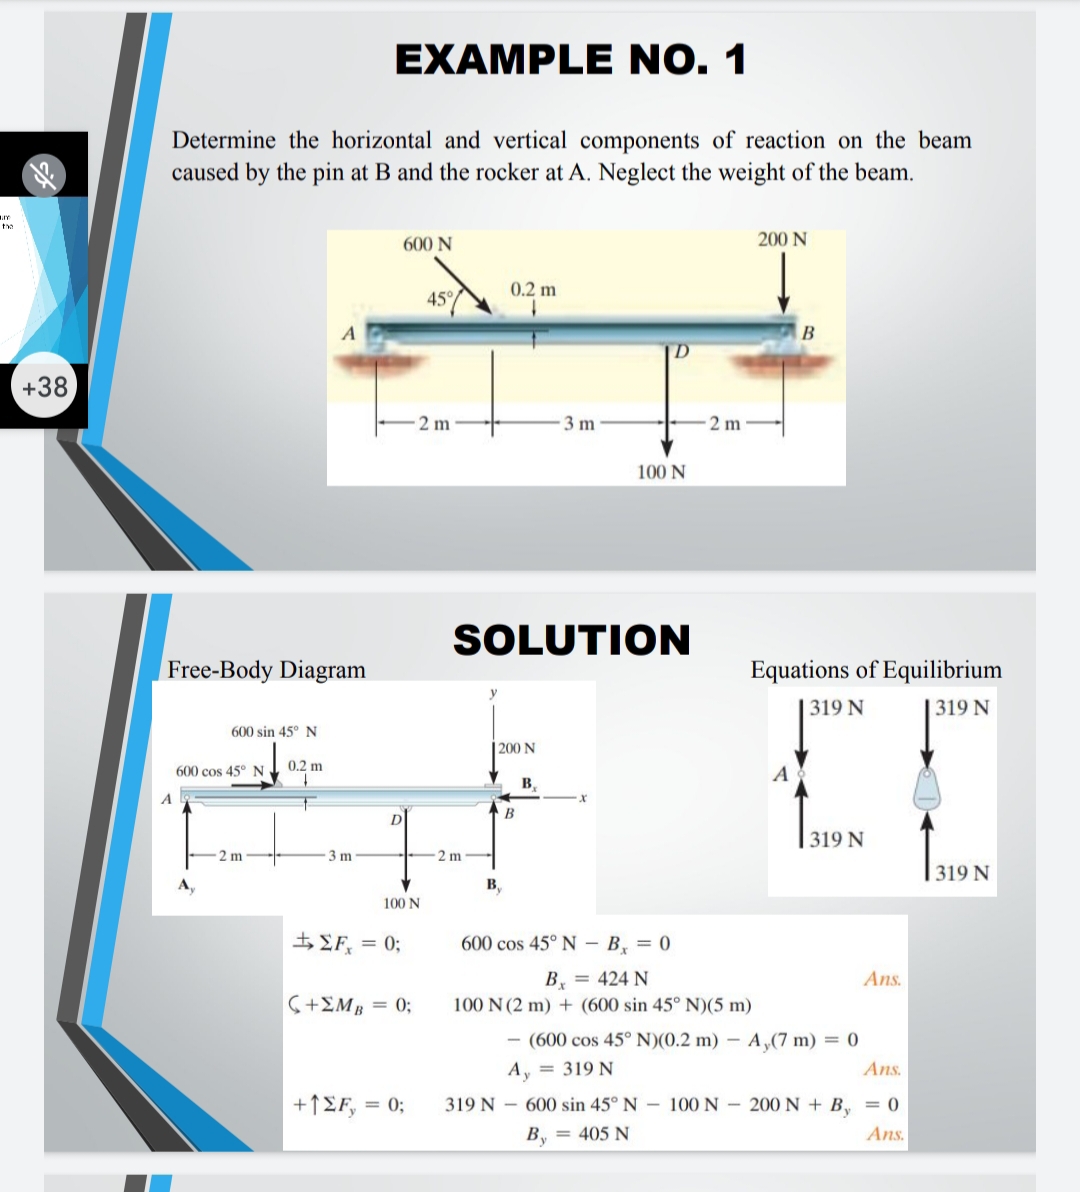 the
+38
EXAMPLE NO. 1
Determine the horizontal and vertical components of reaction on the beam
caused by the pin at B and the rocker at A. Neglect the weight of the beam.
Free-Body Diagram
A
600 sin 45° N
600 cos 45° N
2 m
A
0.2 m
3 m
600 N
100 N
-2 m
+ ΣF = 0;
(+ΣΜ» = 0;
+1 ΣF, = 0;
45°
0.2 m
2 m
| 200 N
SOLUTION
B
3 m
B,
600 cos 45° N
D
100 N
B₁ = 0
2 m
200 N
B₁ = 424 N
100 N (2 m) + (600 sin 45° N)(5 m)
B
Equations of Equilibrium
319 N
1319 N
319 N
(600 cos 45° N)(0.2 m) - A,(7 m) = 0
Ay = 319 N
Ans.
Ans.
319 N-600 sin 45° N 100 N 200 N + By = 0
By = 405 N
Ans.
319 N